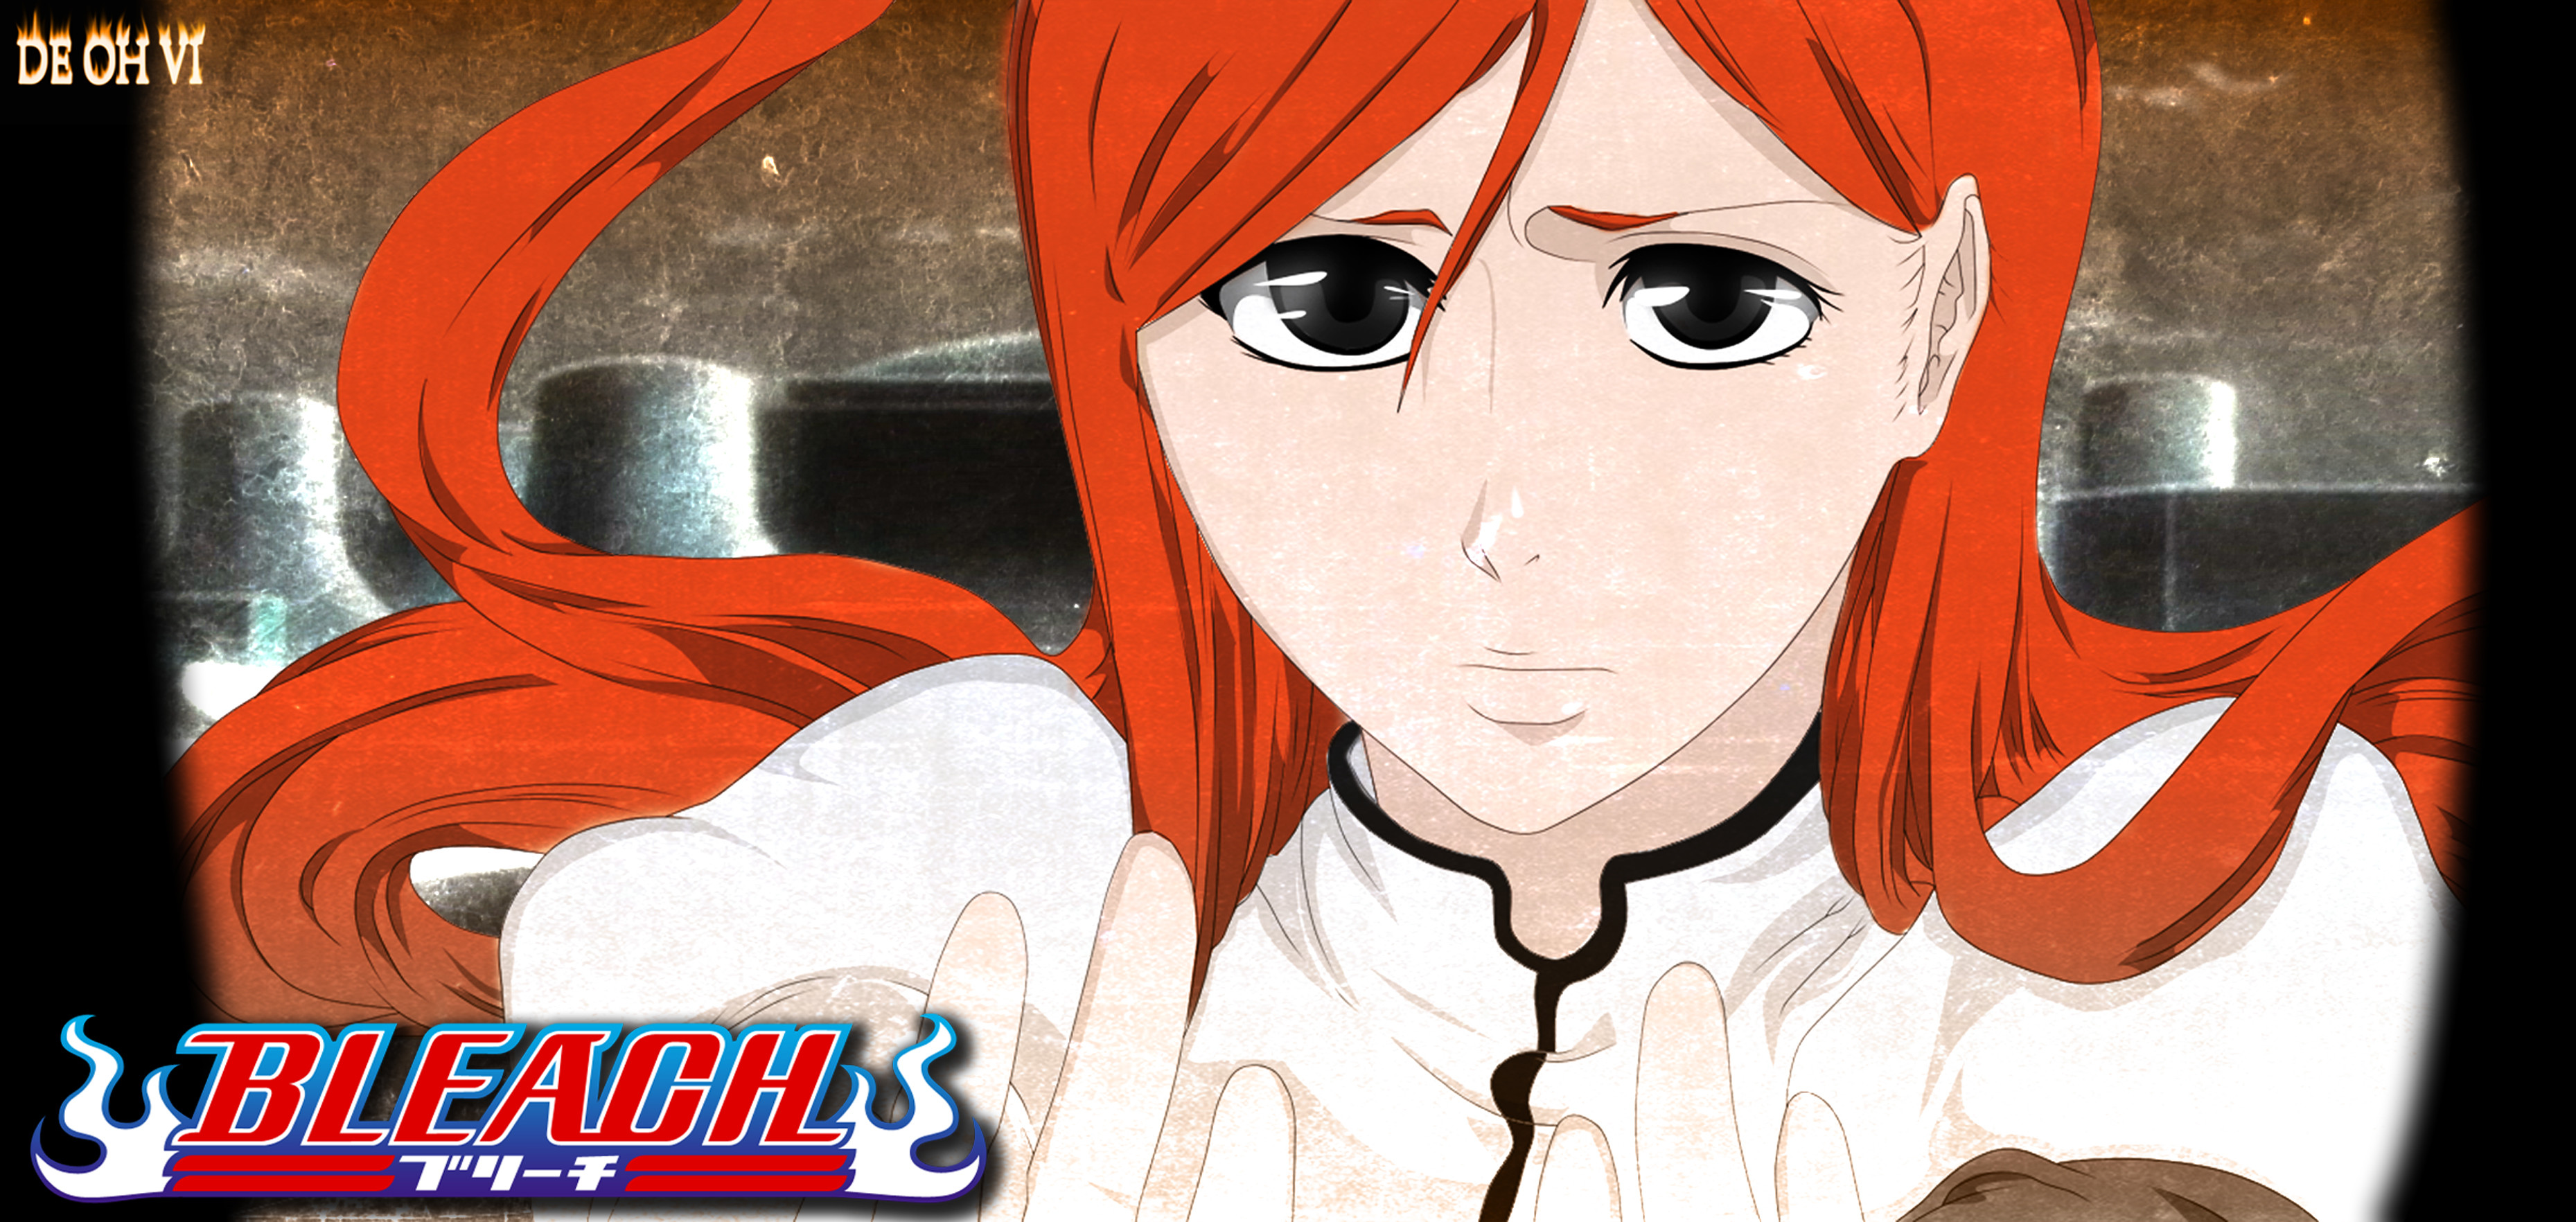 3718x1764 Orihime Inoue color wallpaper by DEOHVI Orihime Inoue color wallpaper by  DEOHVI